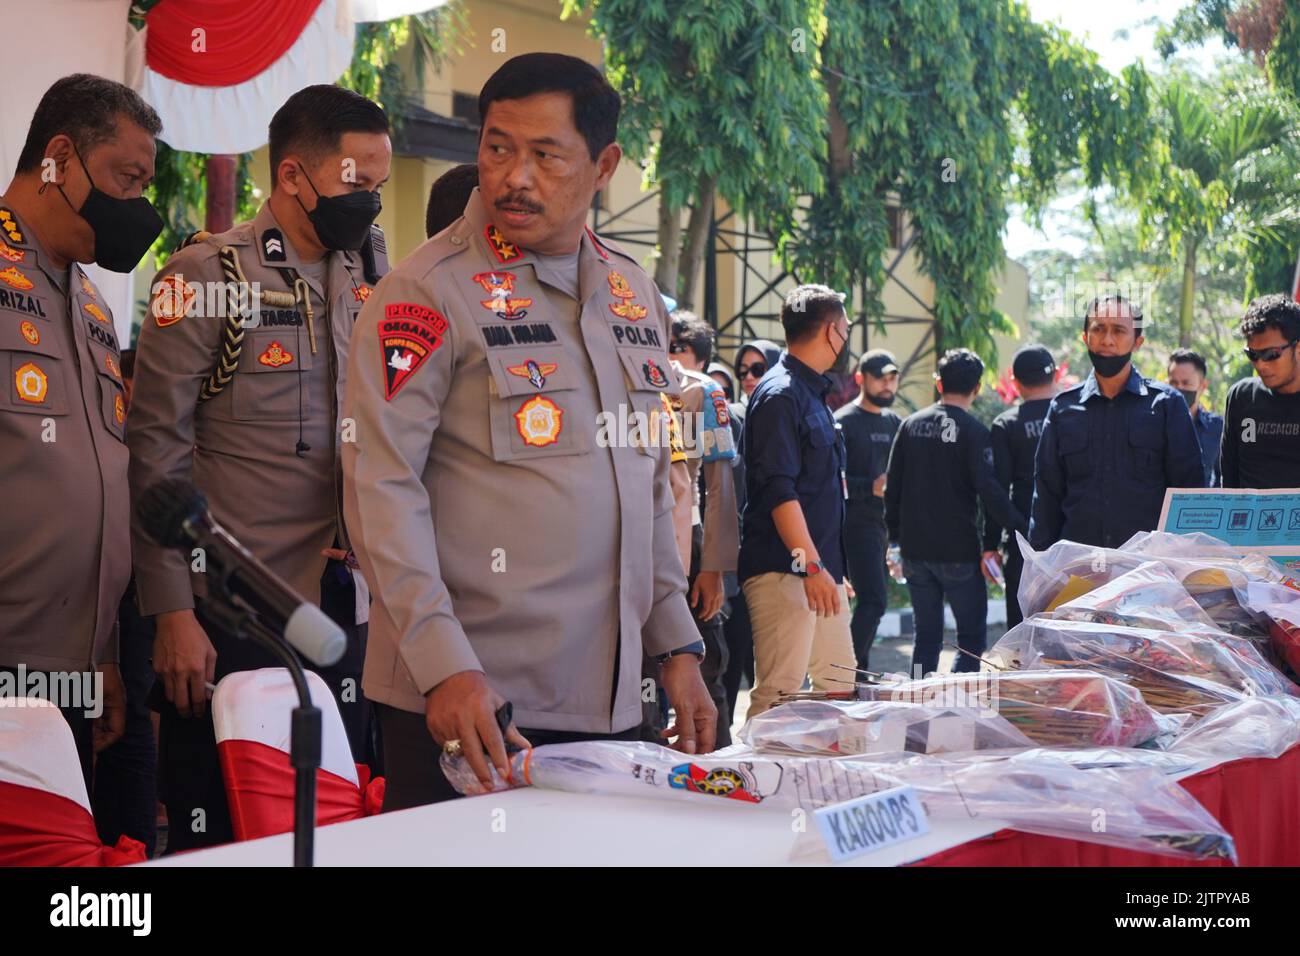 Makassar, South Sulawesi, Indonesia. 1st Sep, 2022. The Head of the South Sulawesi Police, Inspector General of Police Nana Sudjana witnessed evidence resulting from the disclosure of criminal cases for three weeks in an operation called OPERASI SIKAT which was held in Makassar City, Gowa Regency and Maros Regency. Dozens of crime suspects and evidence were successfully secured and presented at a press conference held at the South Sulawesi Police Headquarters, Wednesday, September 1, 2022. The cases revealed were robbery, theft, and crimes of assault using arrows. (Credit Image: © Herwin B Stock Photo